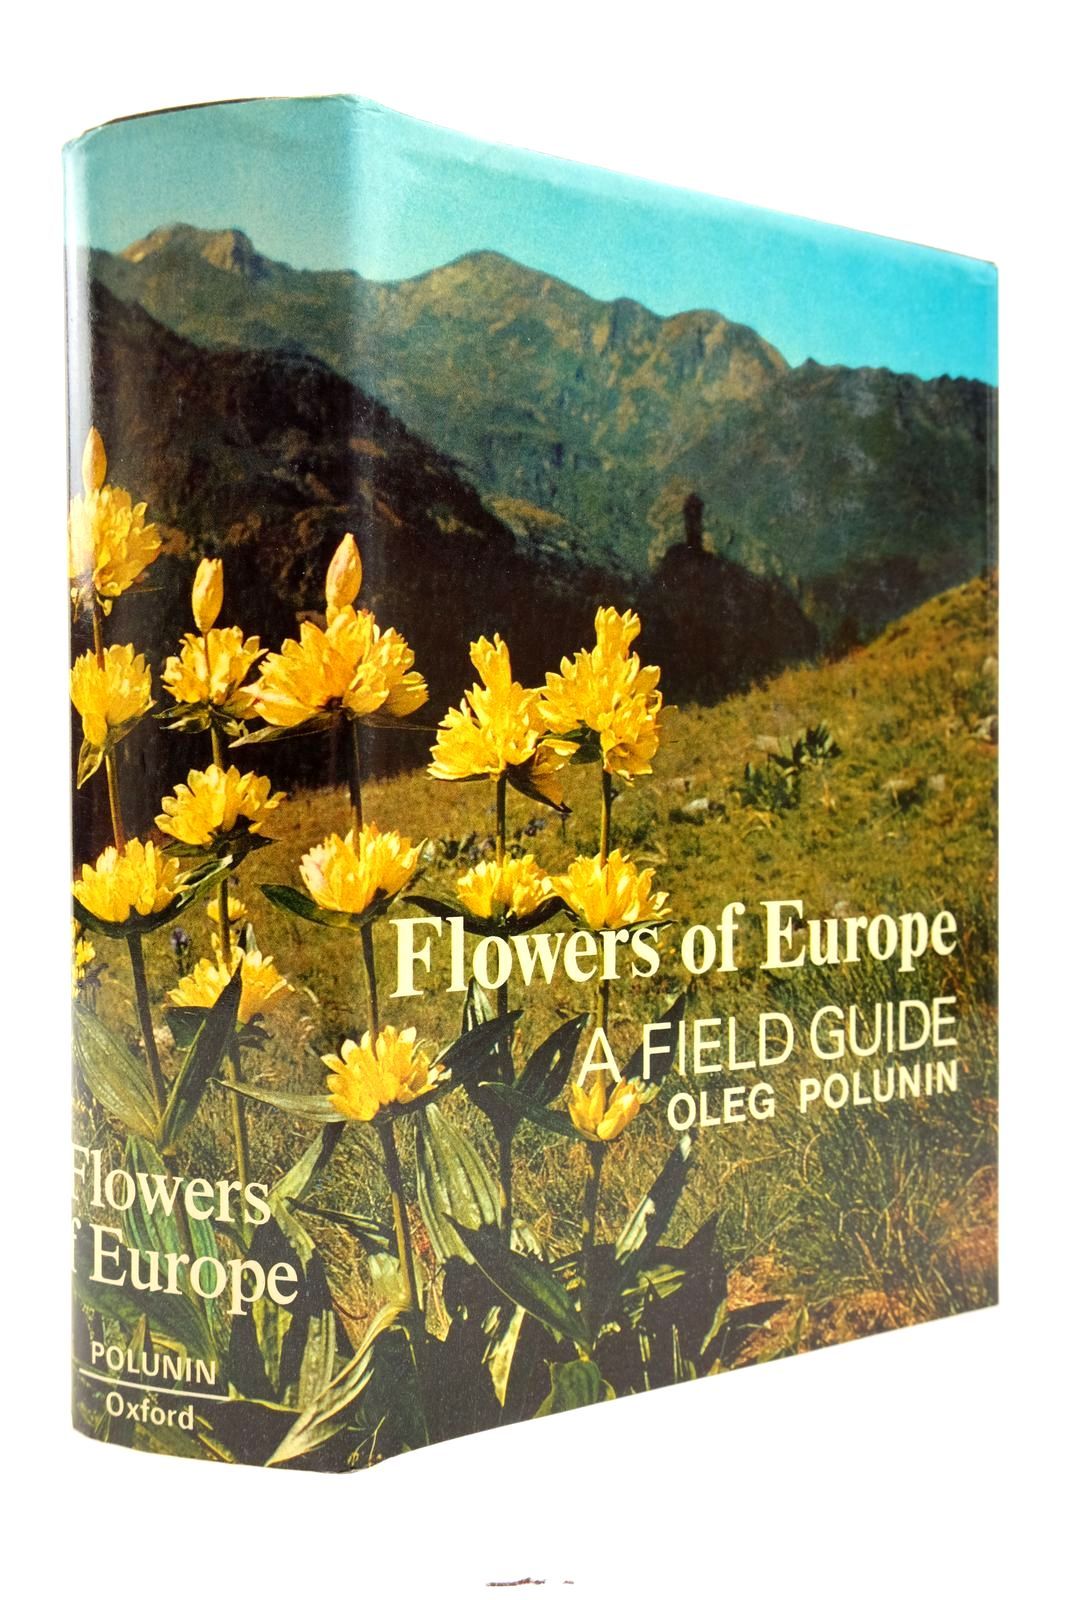 Photo of FLOWERS OF EUROPE: A FIELD GUIDE written by Polunin, Oleg illustrated by Everard, Barbara published by Oxford University Press (STOCK CODE: 1823716)  for sale by Stella & Rose's Books